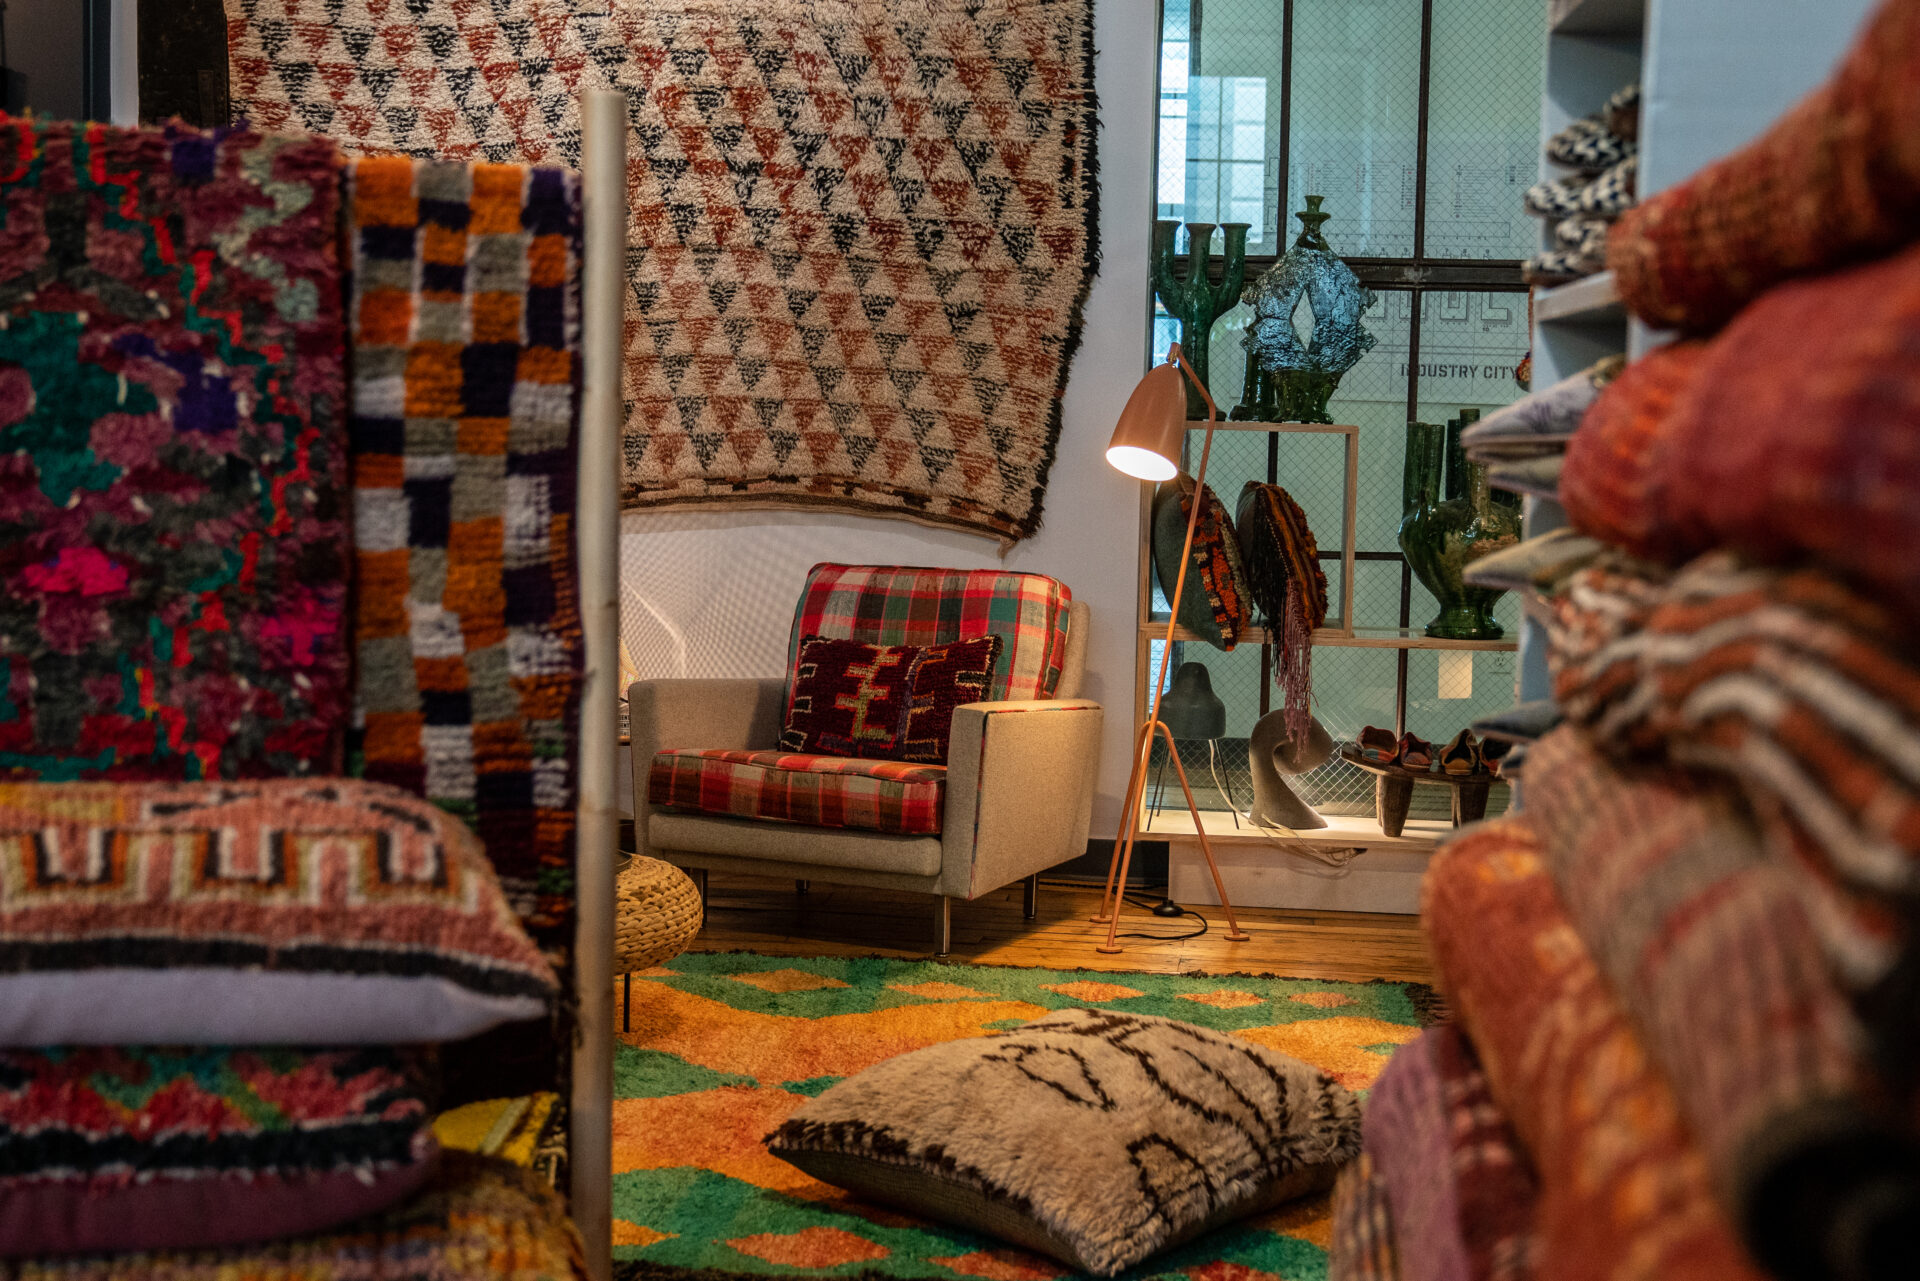 The interior of a rug store.